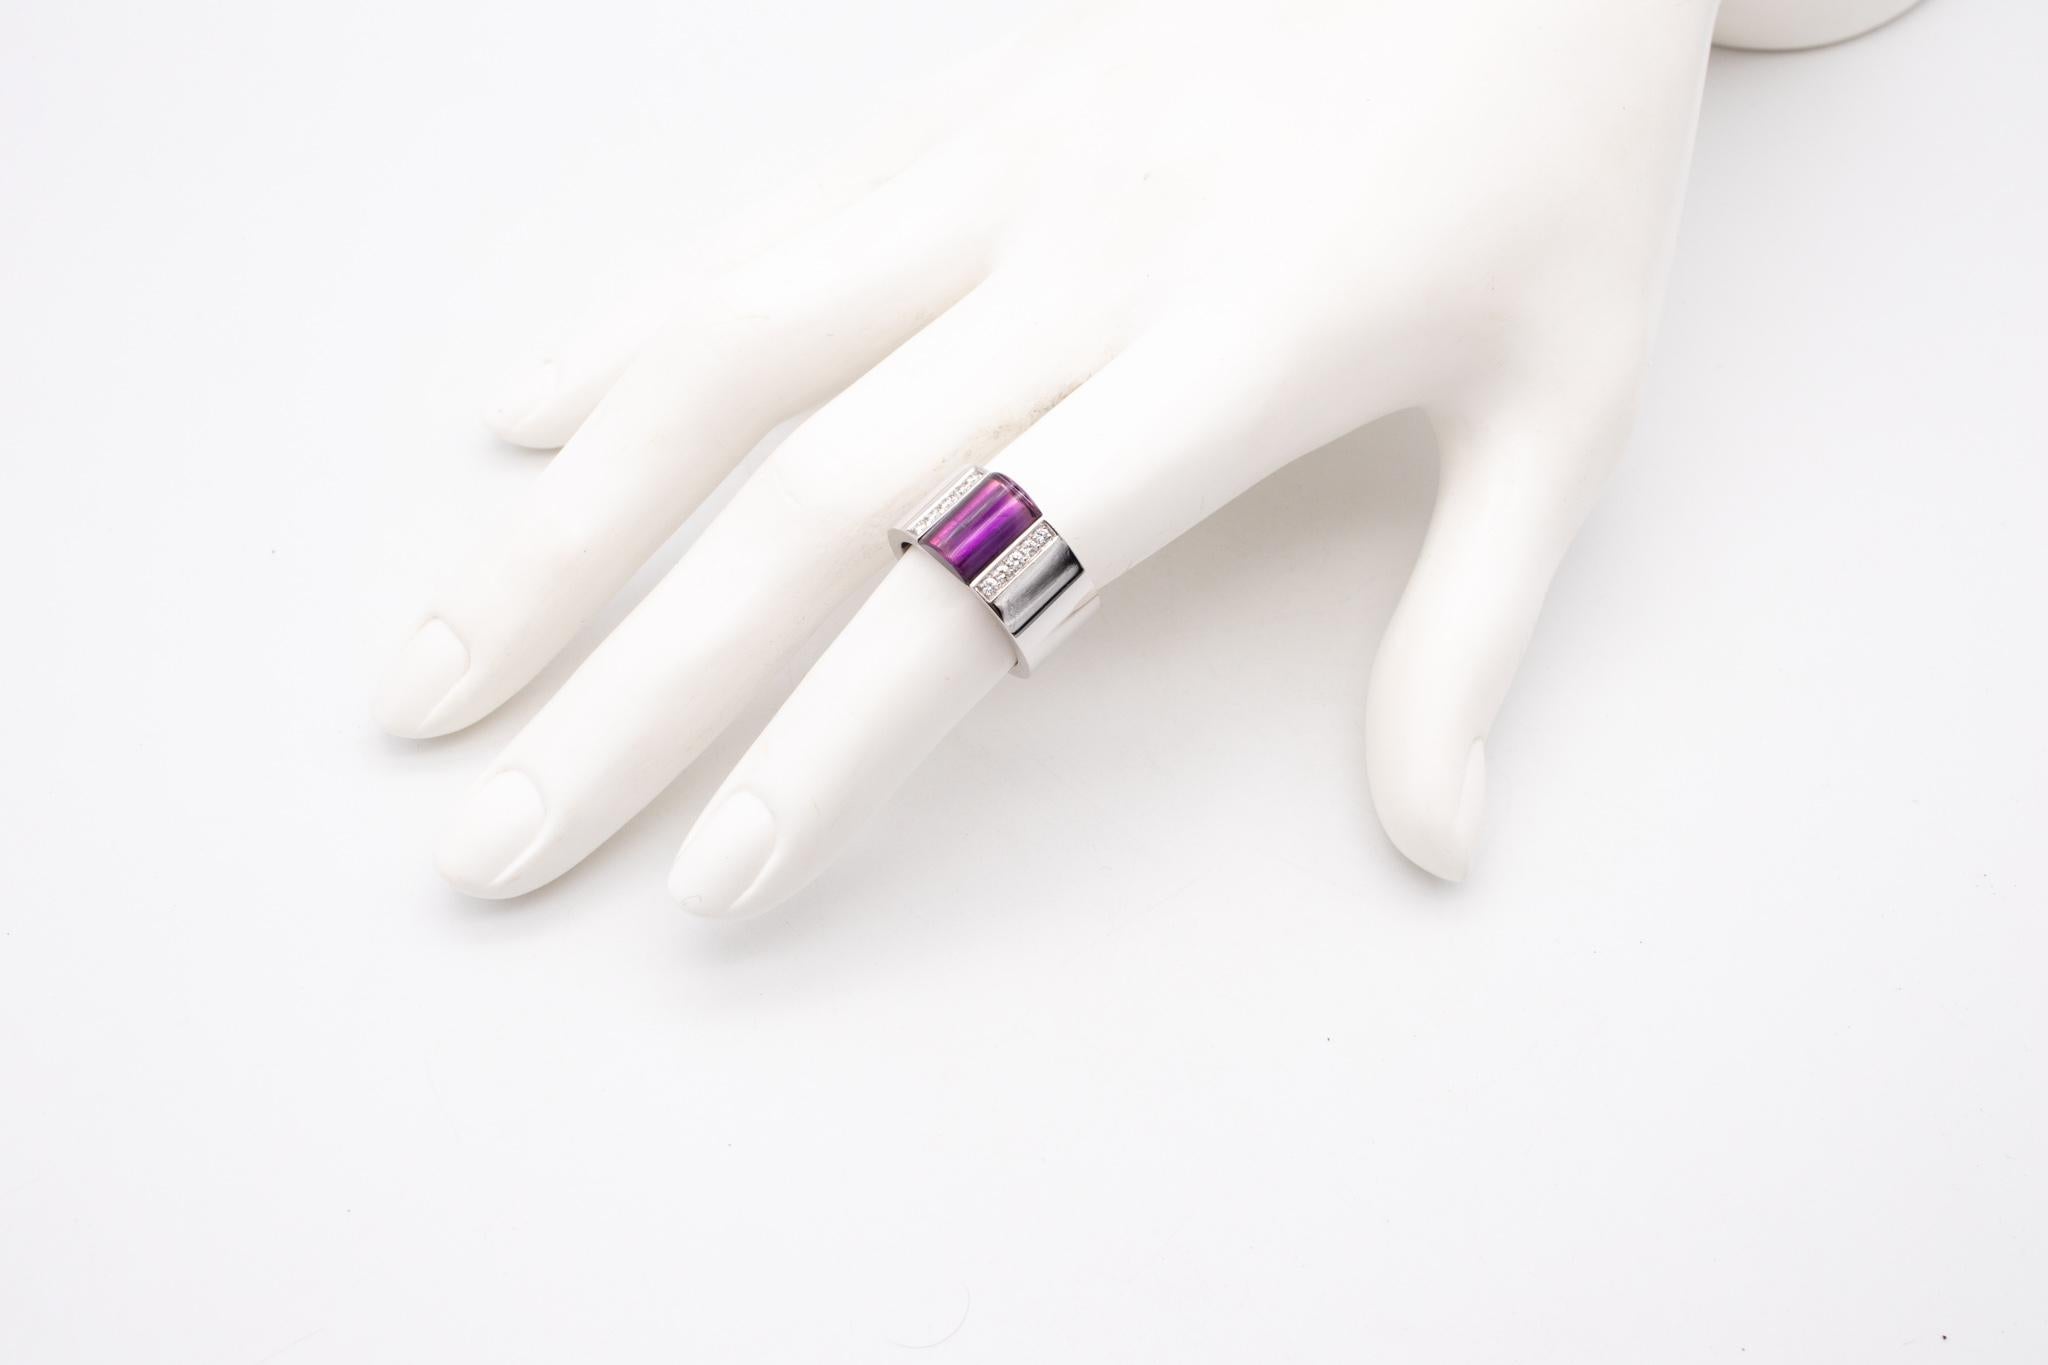 Beautiful gem set ring designed by Gucci.

A modern geometric piece made in Milano, Italy by the house of Gucci. This sculptural ring was crafted in solid white gold of 18 karats, with high polished finish.

Mounted in the center, with one cabochon